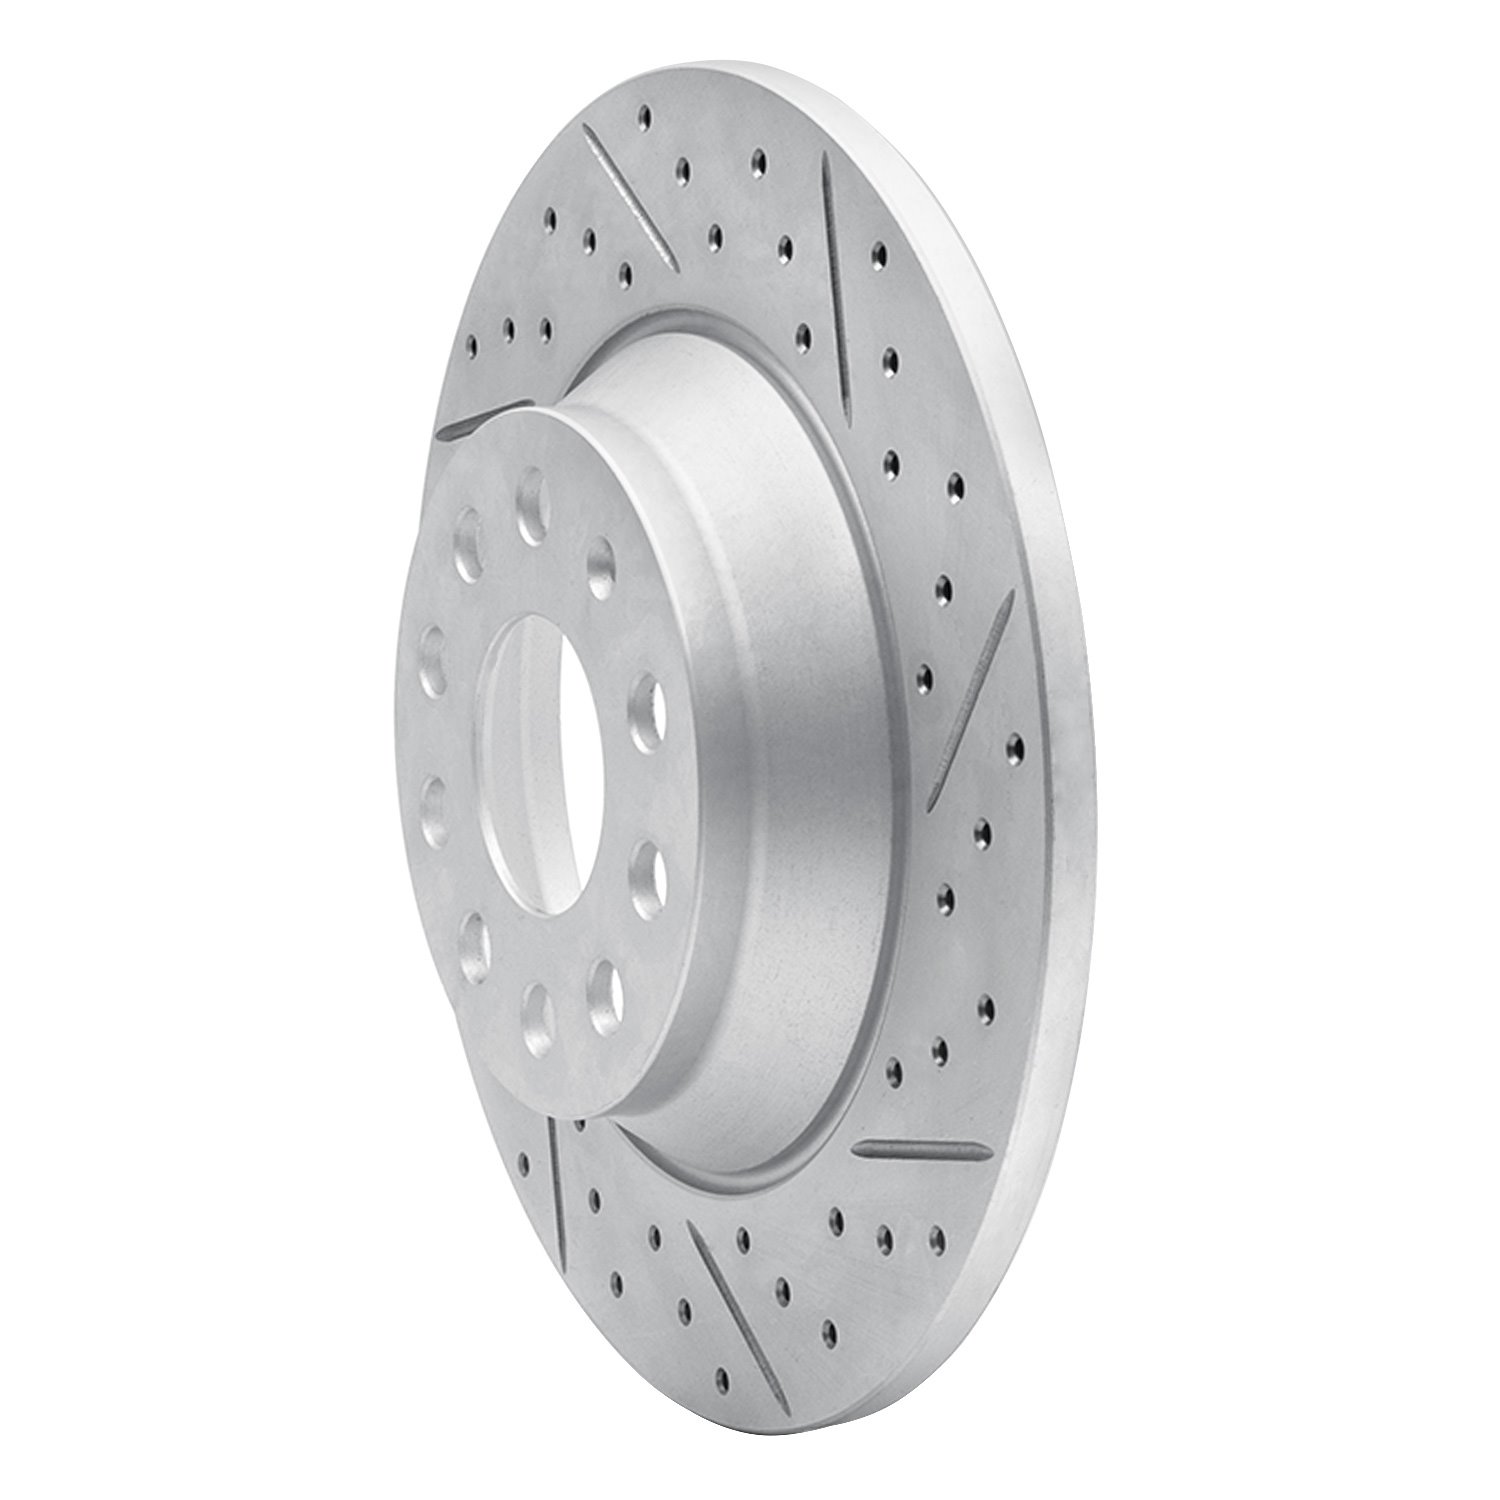 830-73082R Geoperformance Drilled/Slotted Brake Rotor, Fits Select Audi/Volkswagen, Position: Rear Right